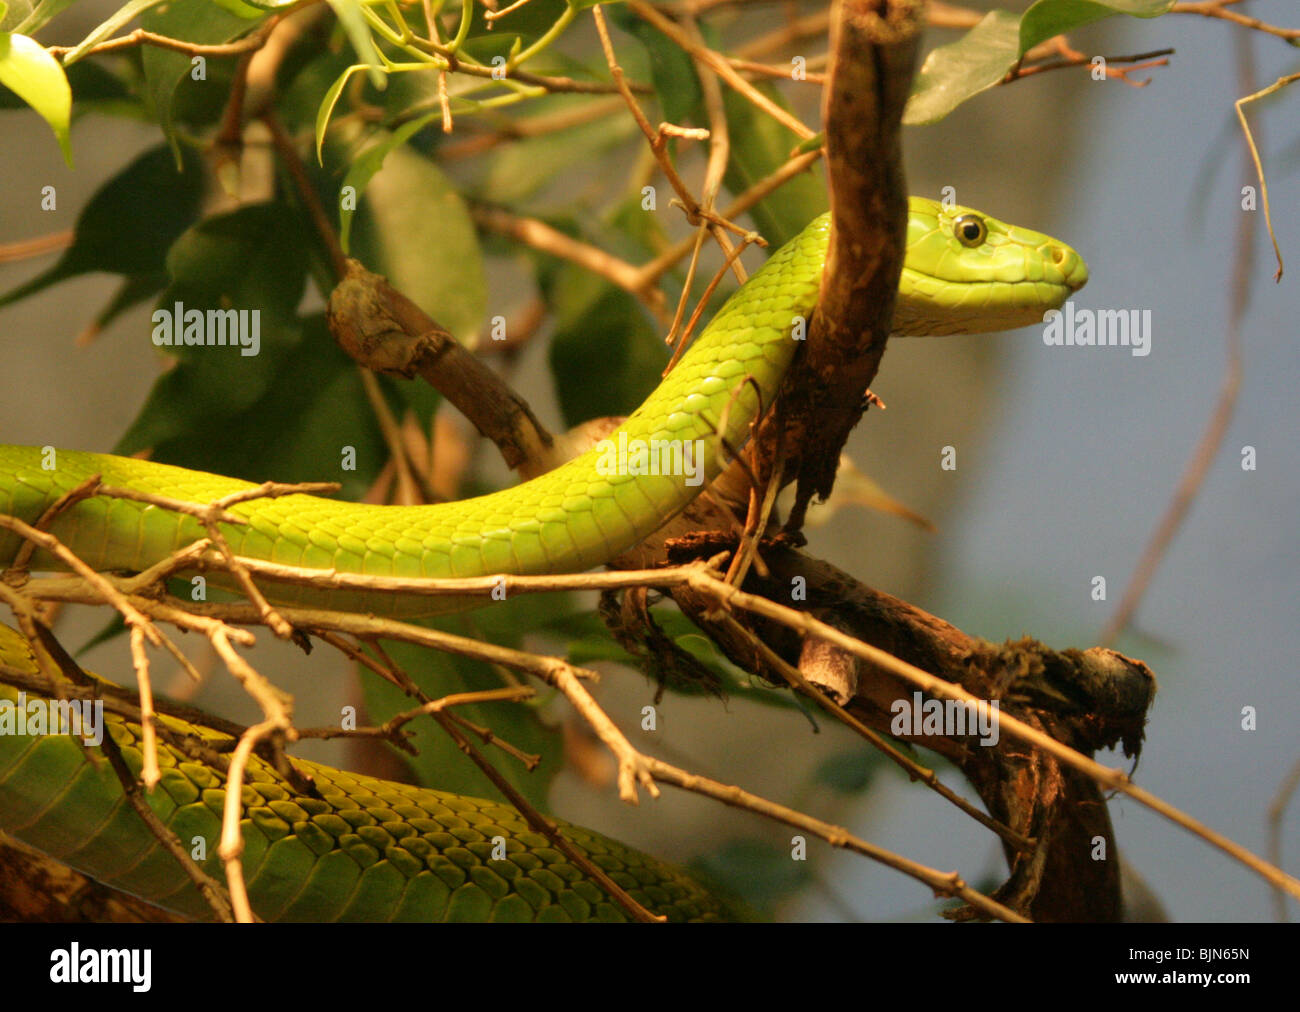 Eastern Green or Common Mamba, Dendroaspis angusticeps, Elapidae. Africa. Stock Photo